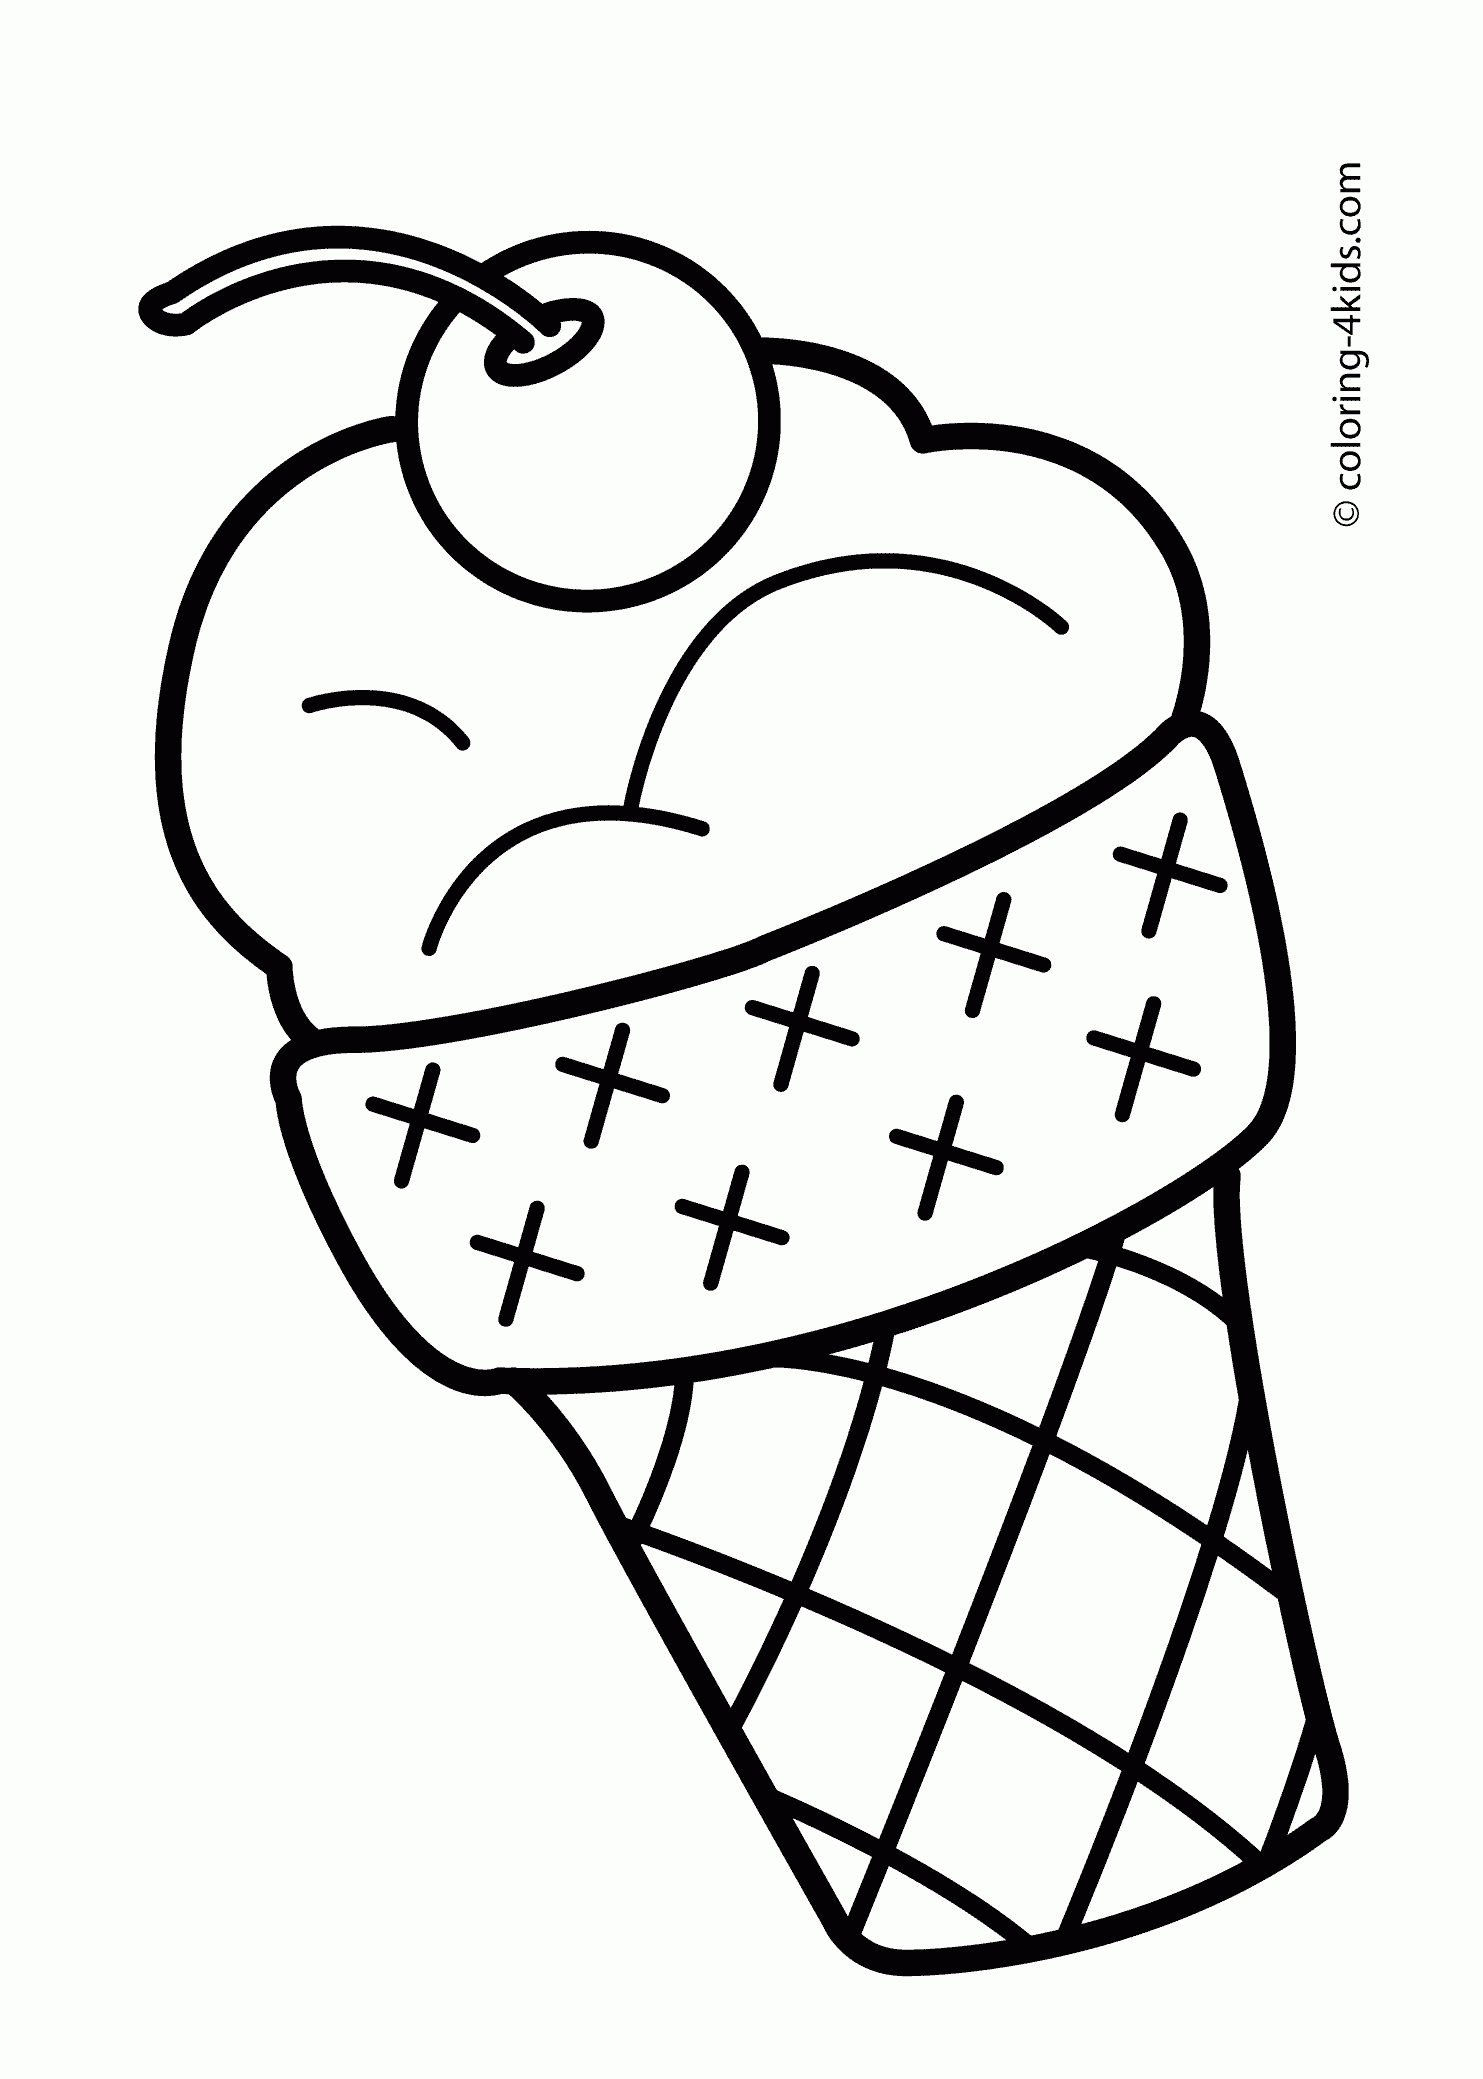 Summer Coloring Pages With Ice Cream For Kids, Seasons Coloring - Free Printable Summer Coloring Pages For Adults